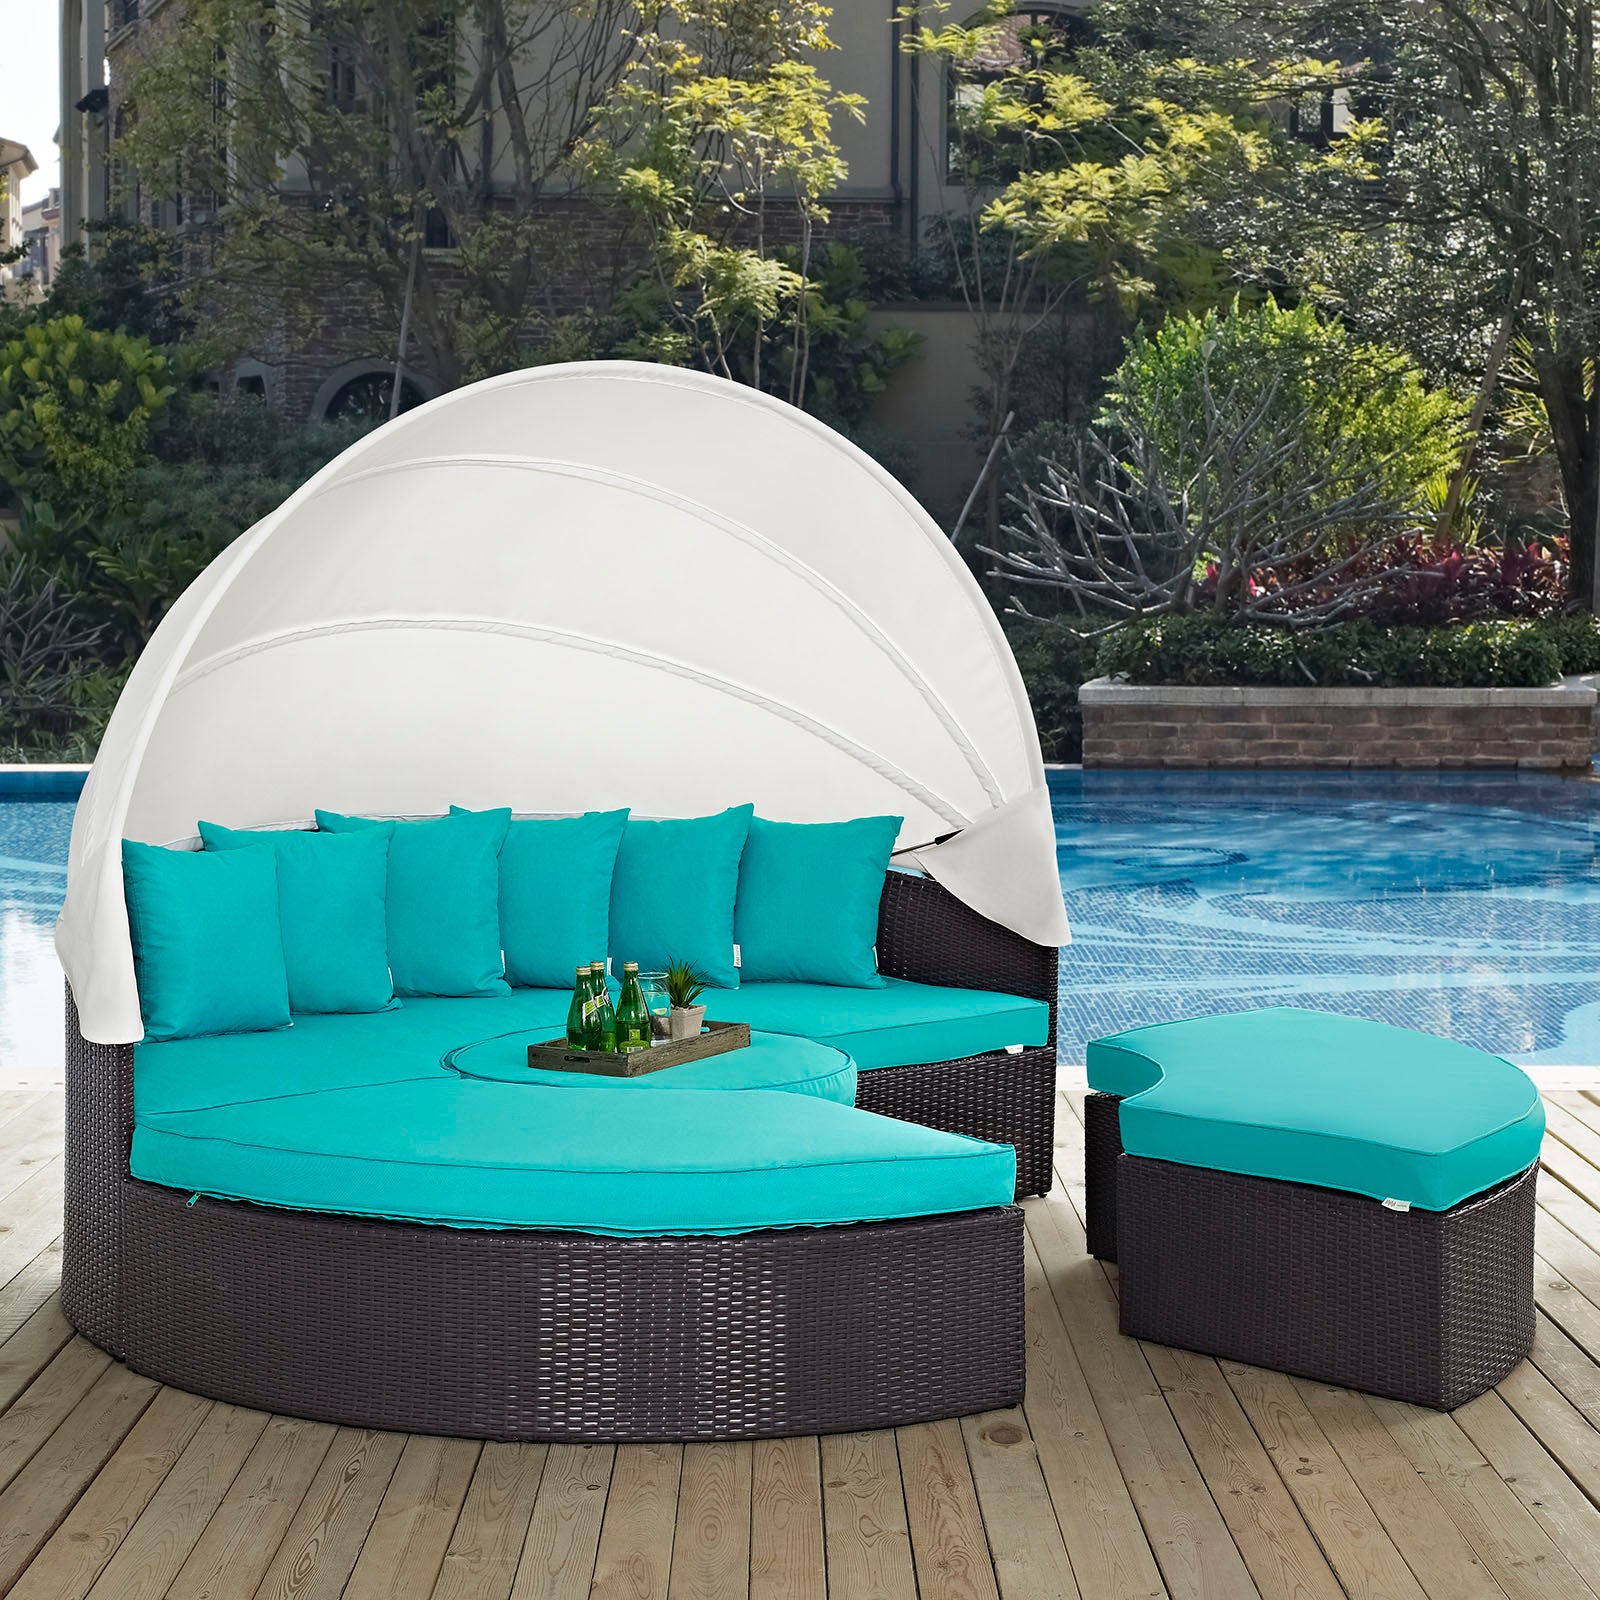 Modway Patio Daybeds - Convene 4 Piece Canopy Outdoor Patio Daybed Espresso & Turquoise